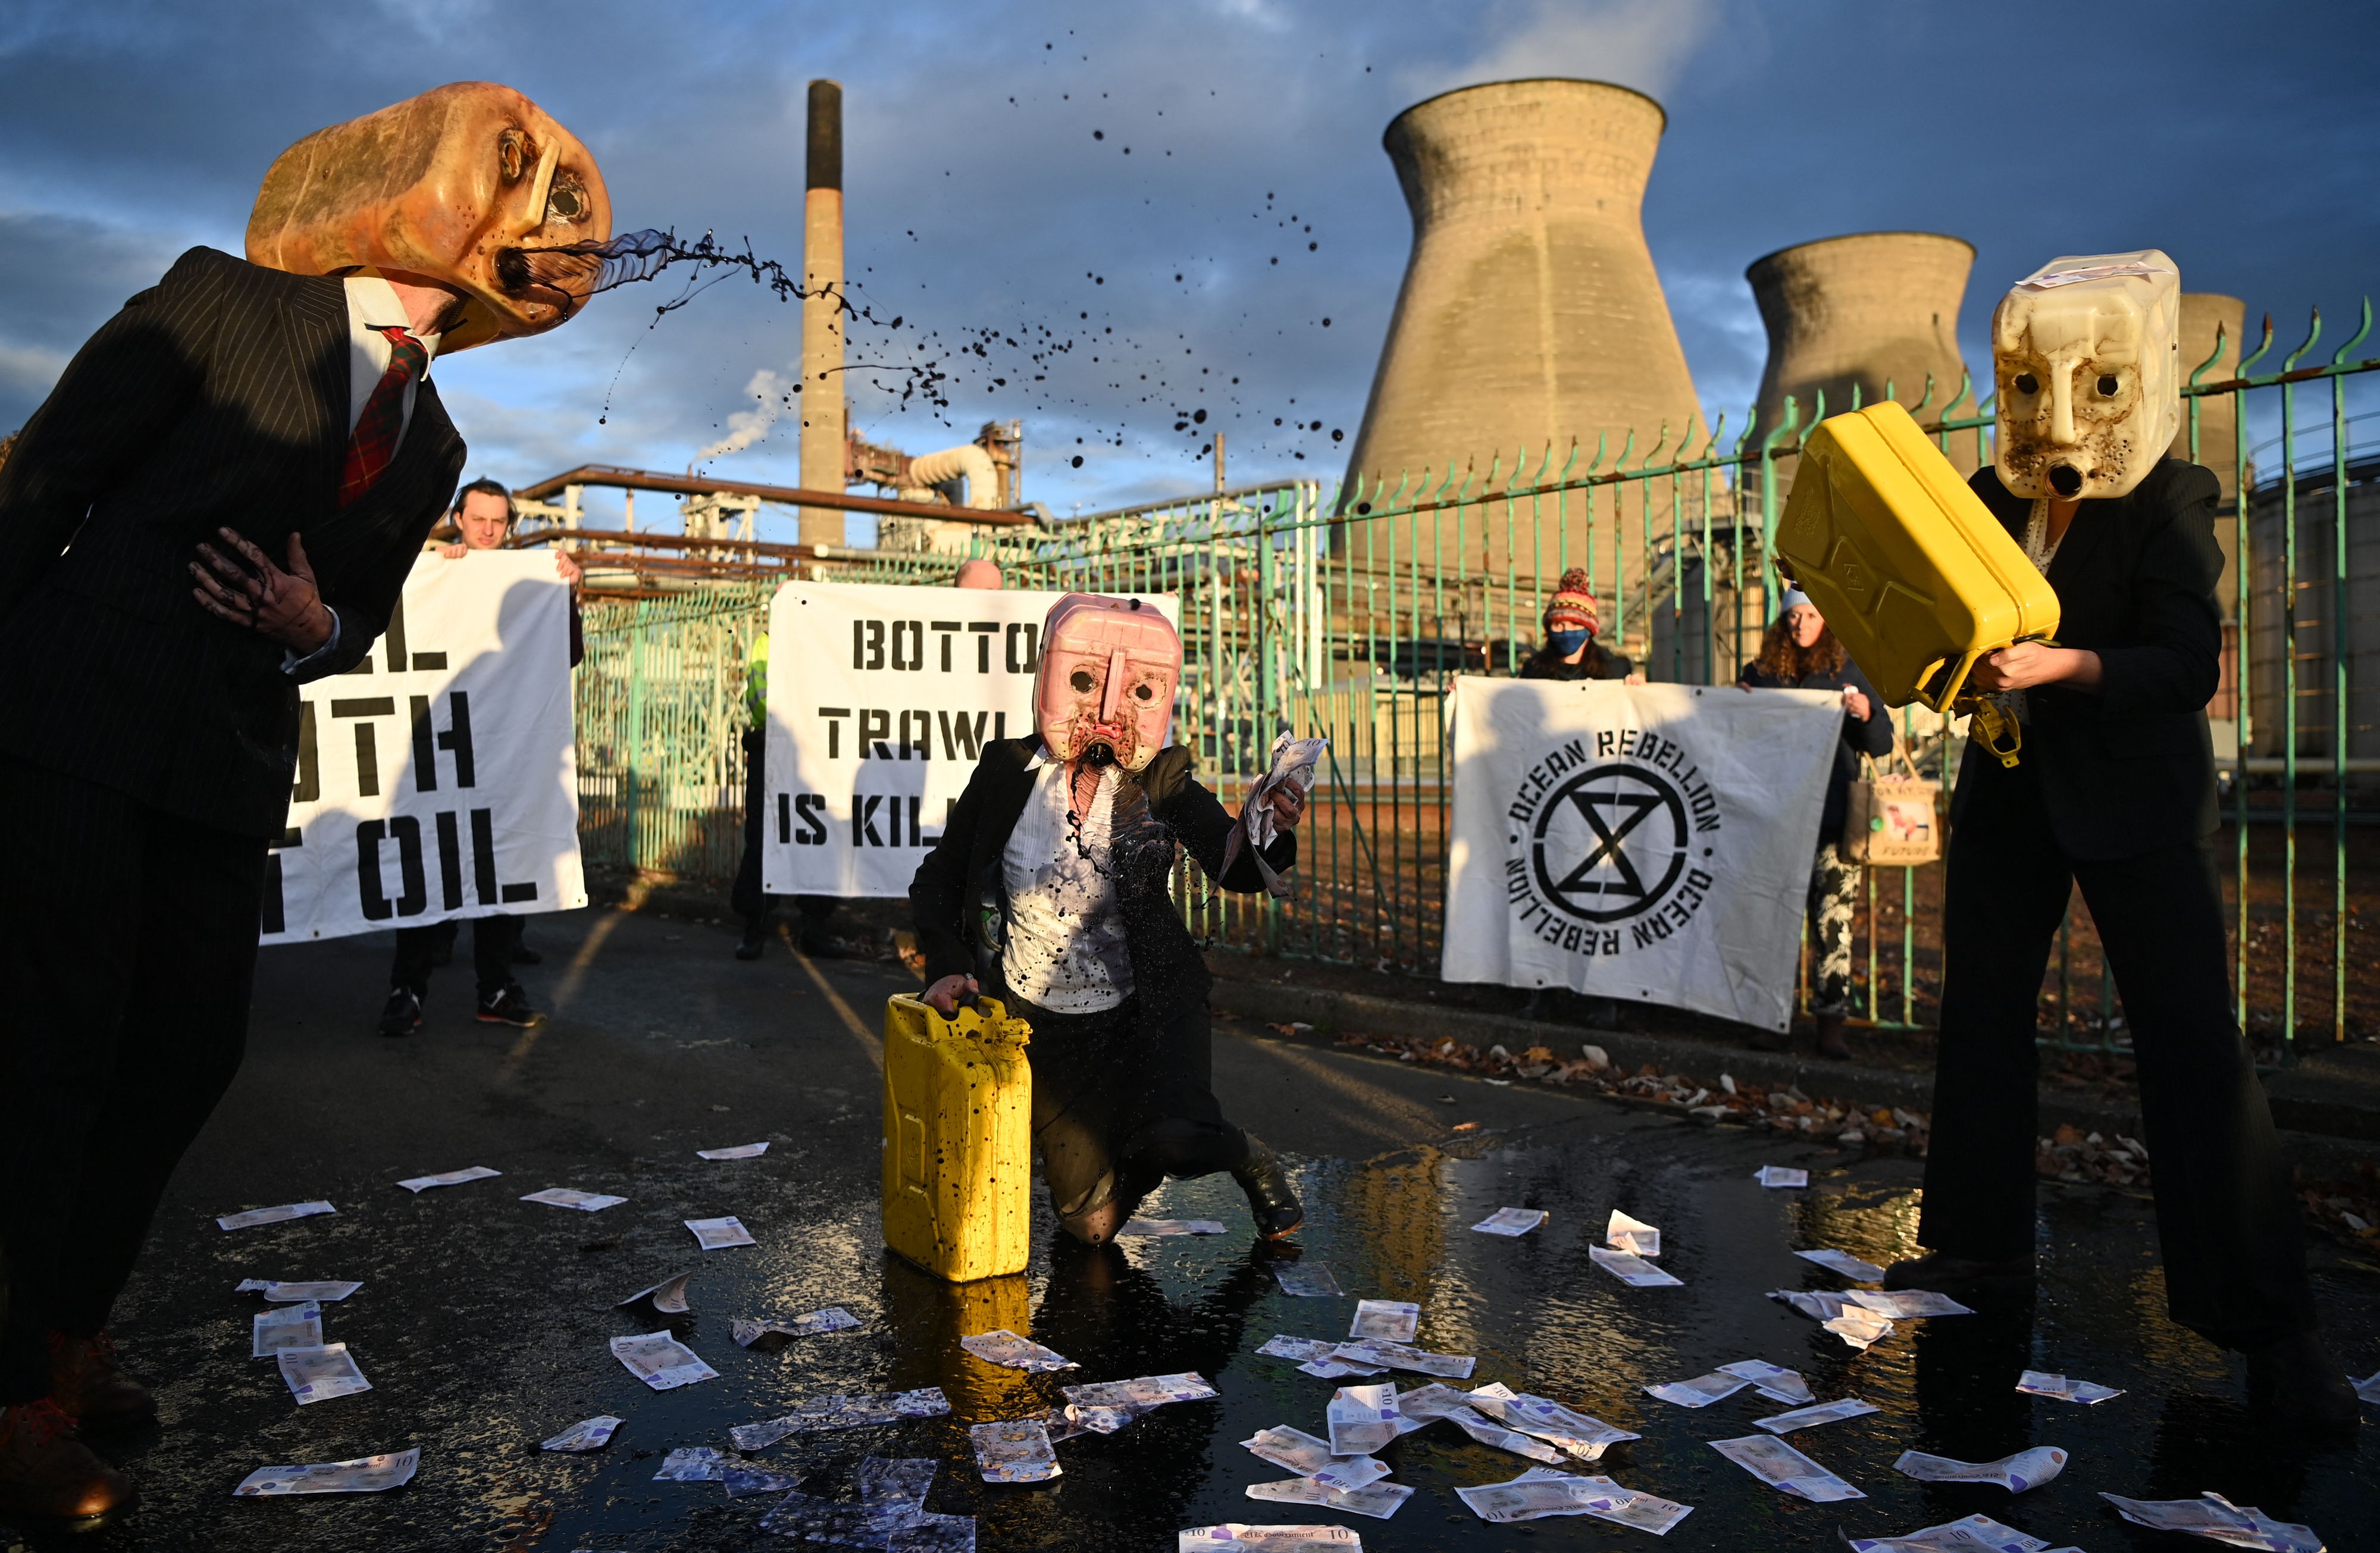 Oil Heads, climate activists from the Ocean Rebellion group, demonstrate outside the INEOS intergrated refinery and petrochemicals centre plant in Grangemouth.